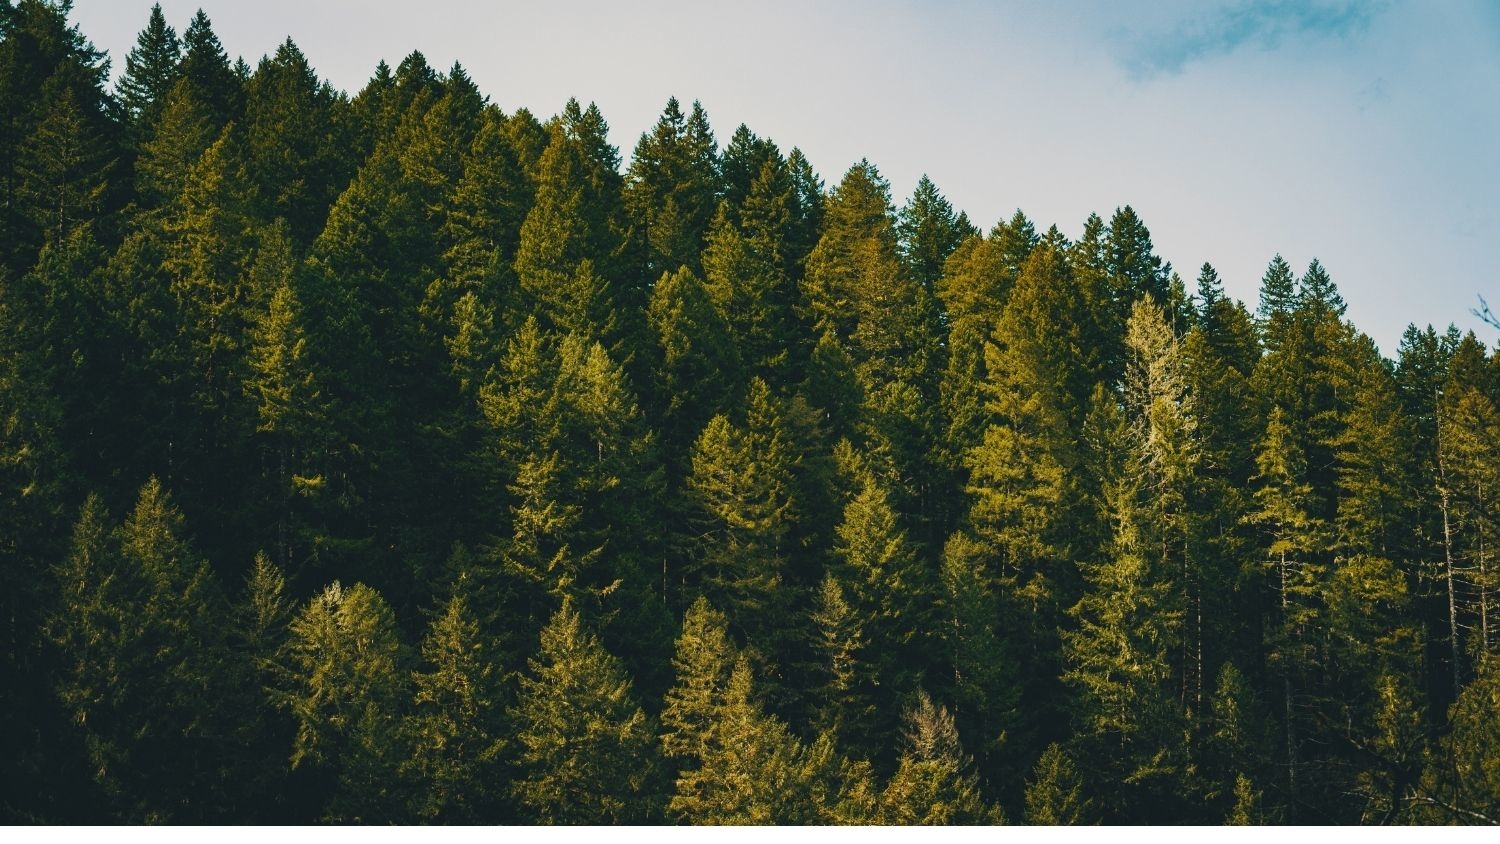 Mountain forest - Cost of Planning, Protecting Trees to Fight Climate Change Could Jump - College of Natural Resources News NC State University